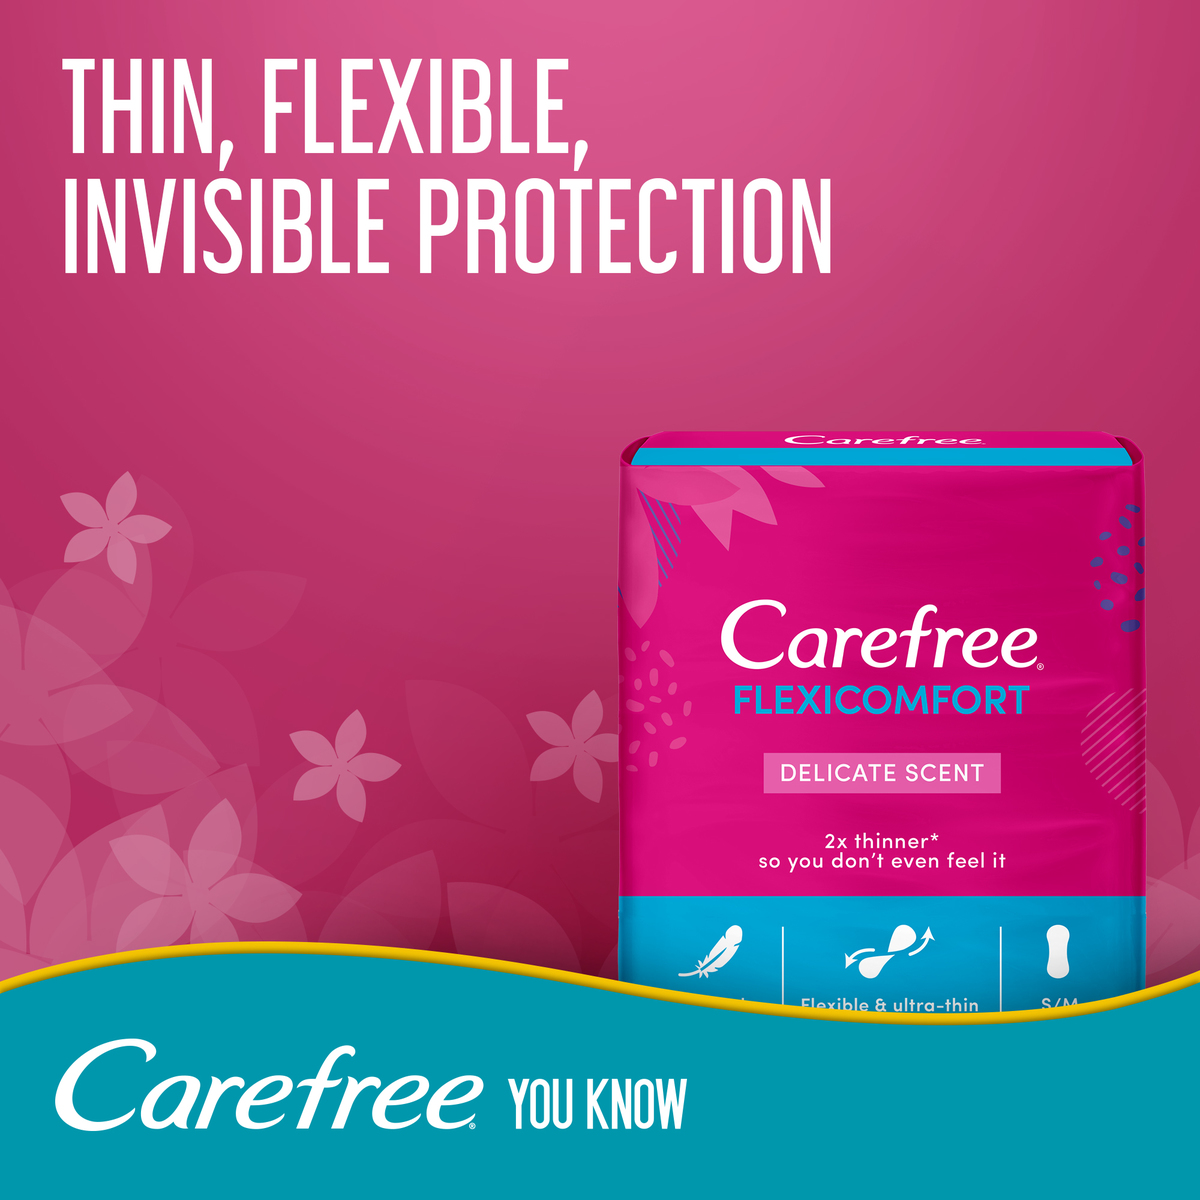 Carefree Panty Liners FlexiComfort Delicate Scent 20pcs